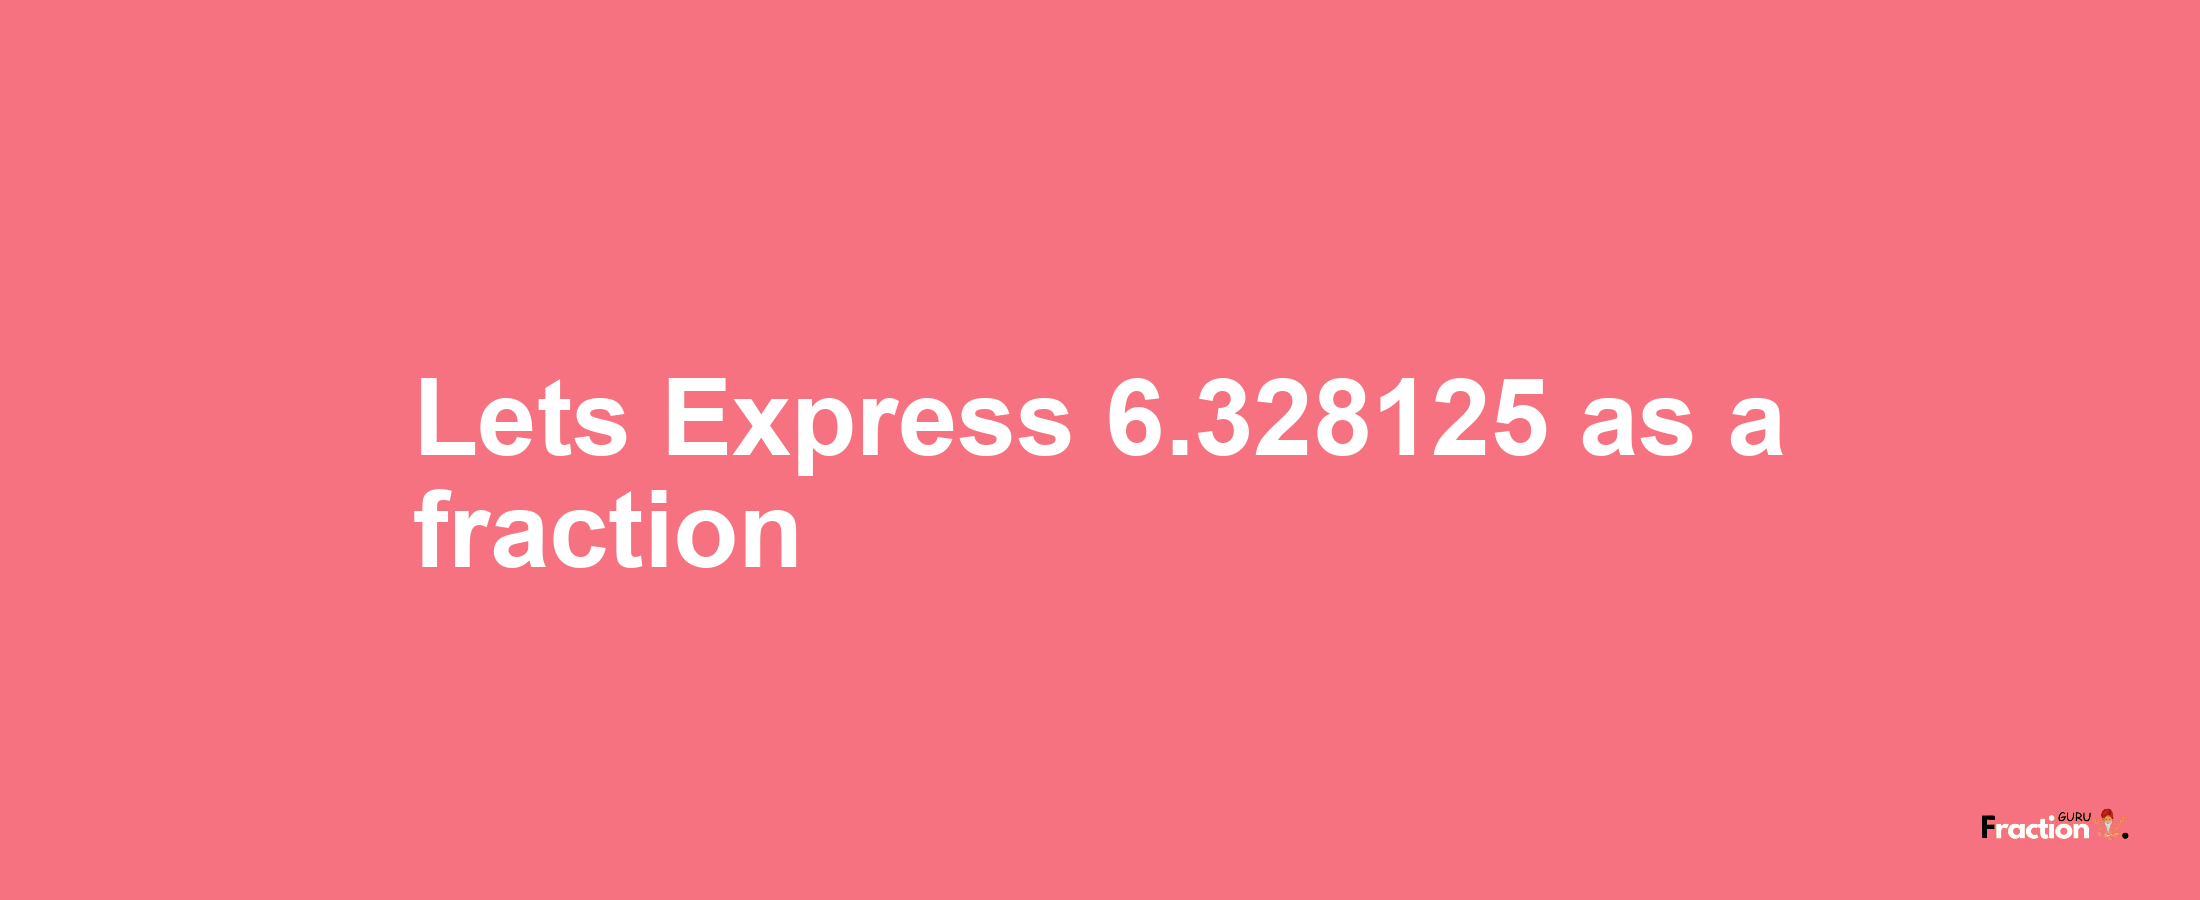 Lets Express 6.328125 as afraction